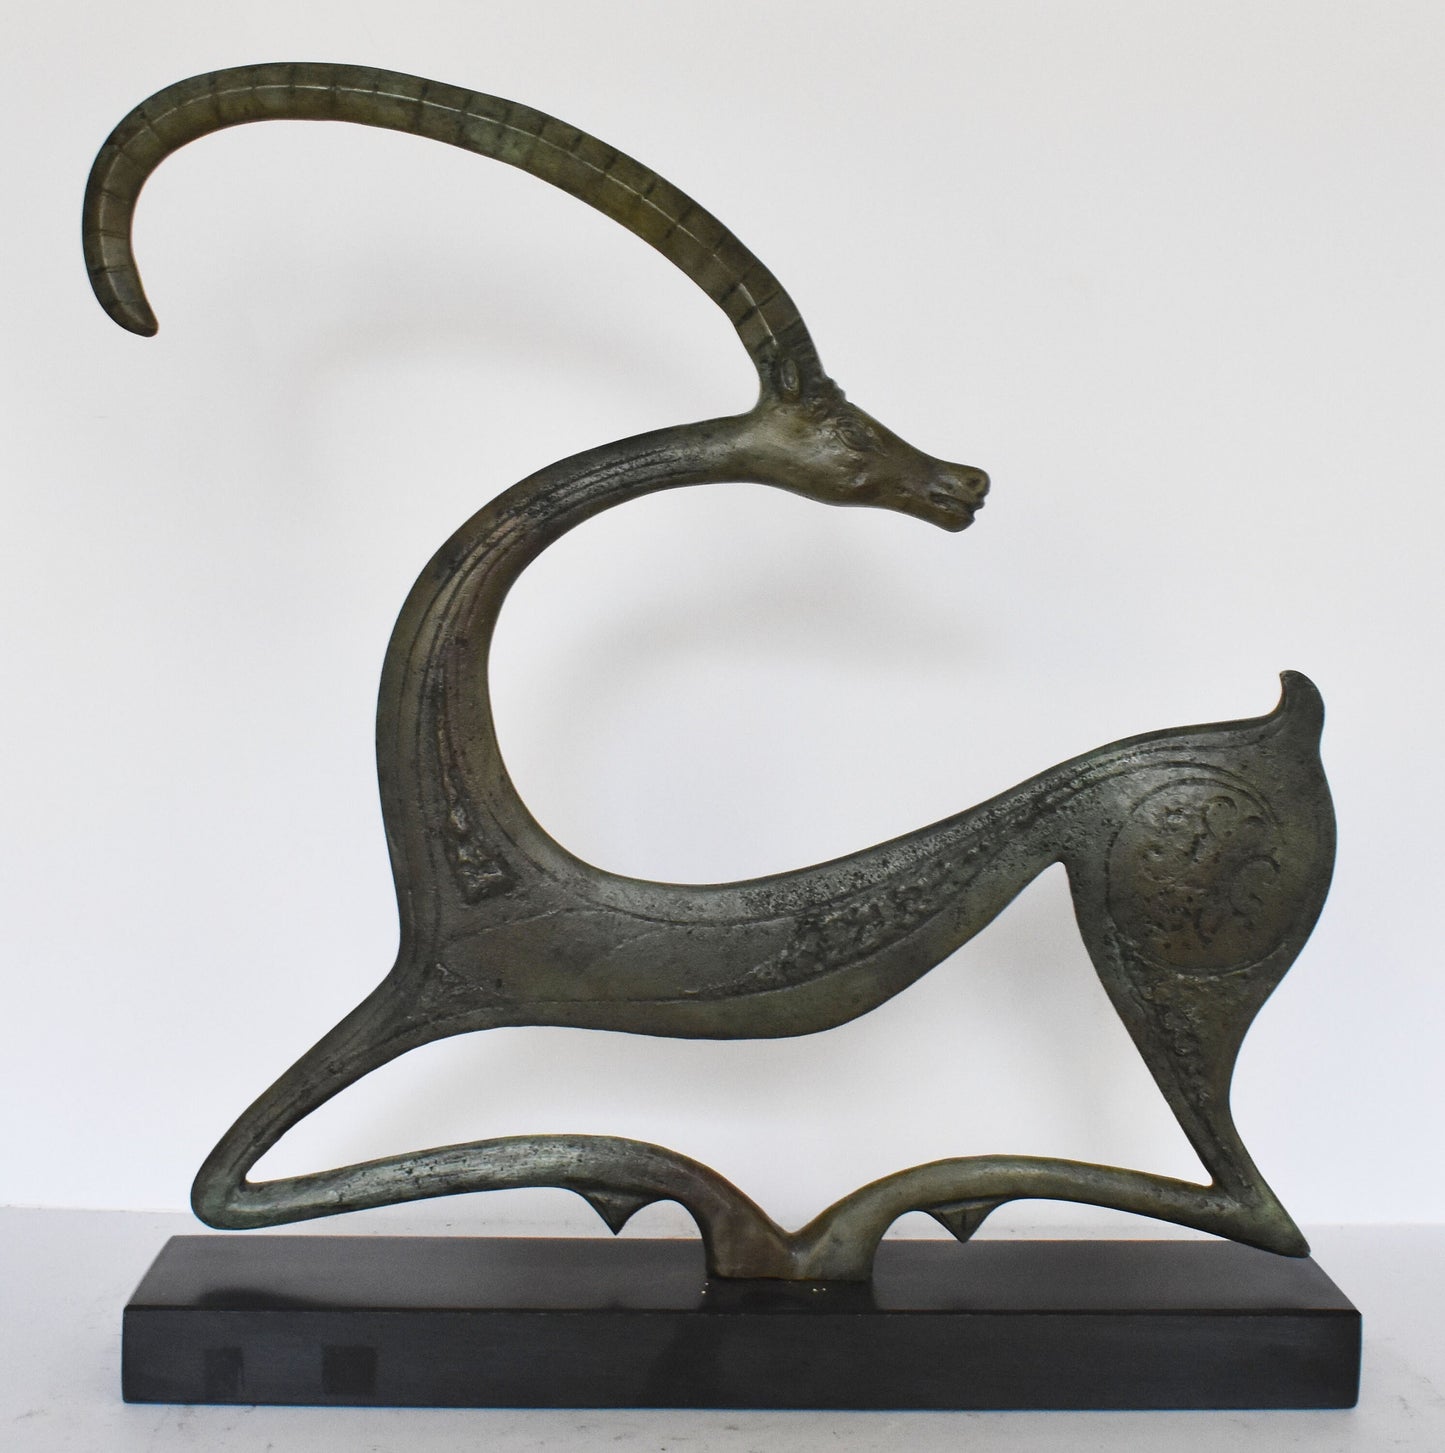 Graceful Ibex - Bronze - Symbol of Energy, Long Life, Fertility - By scaling vertical heights, the ibex teaches courage and conquering fear